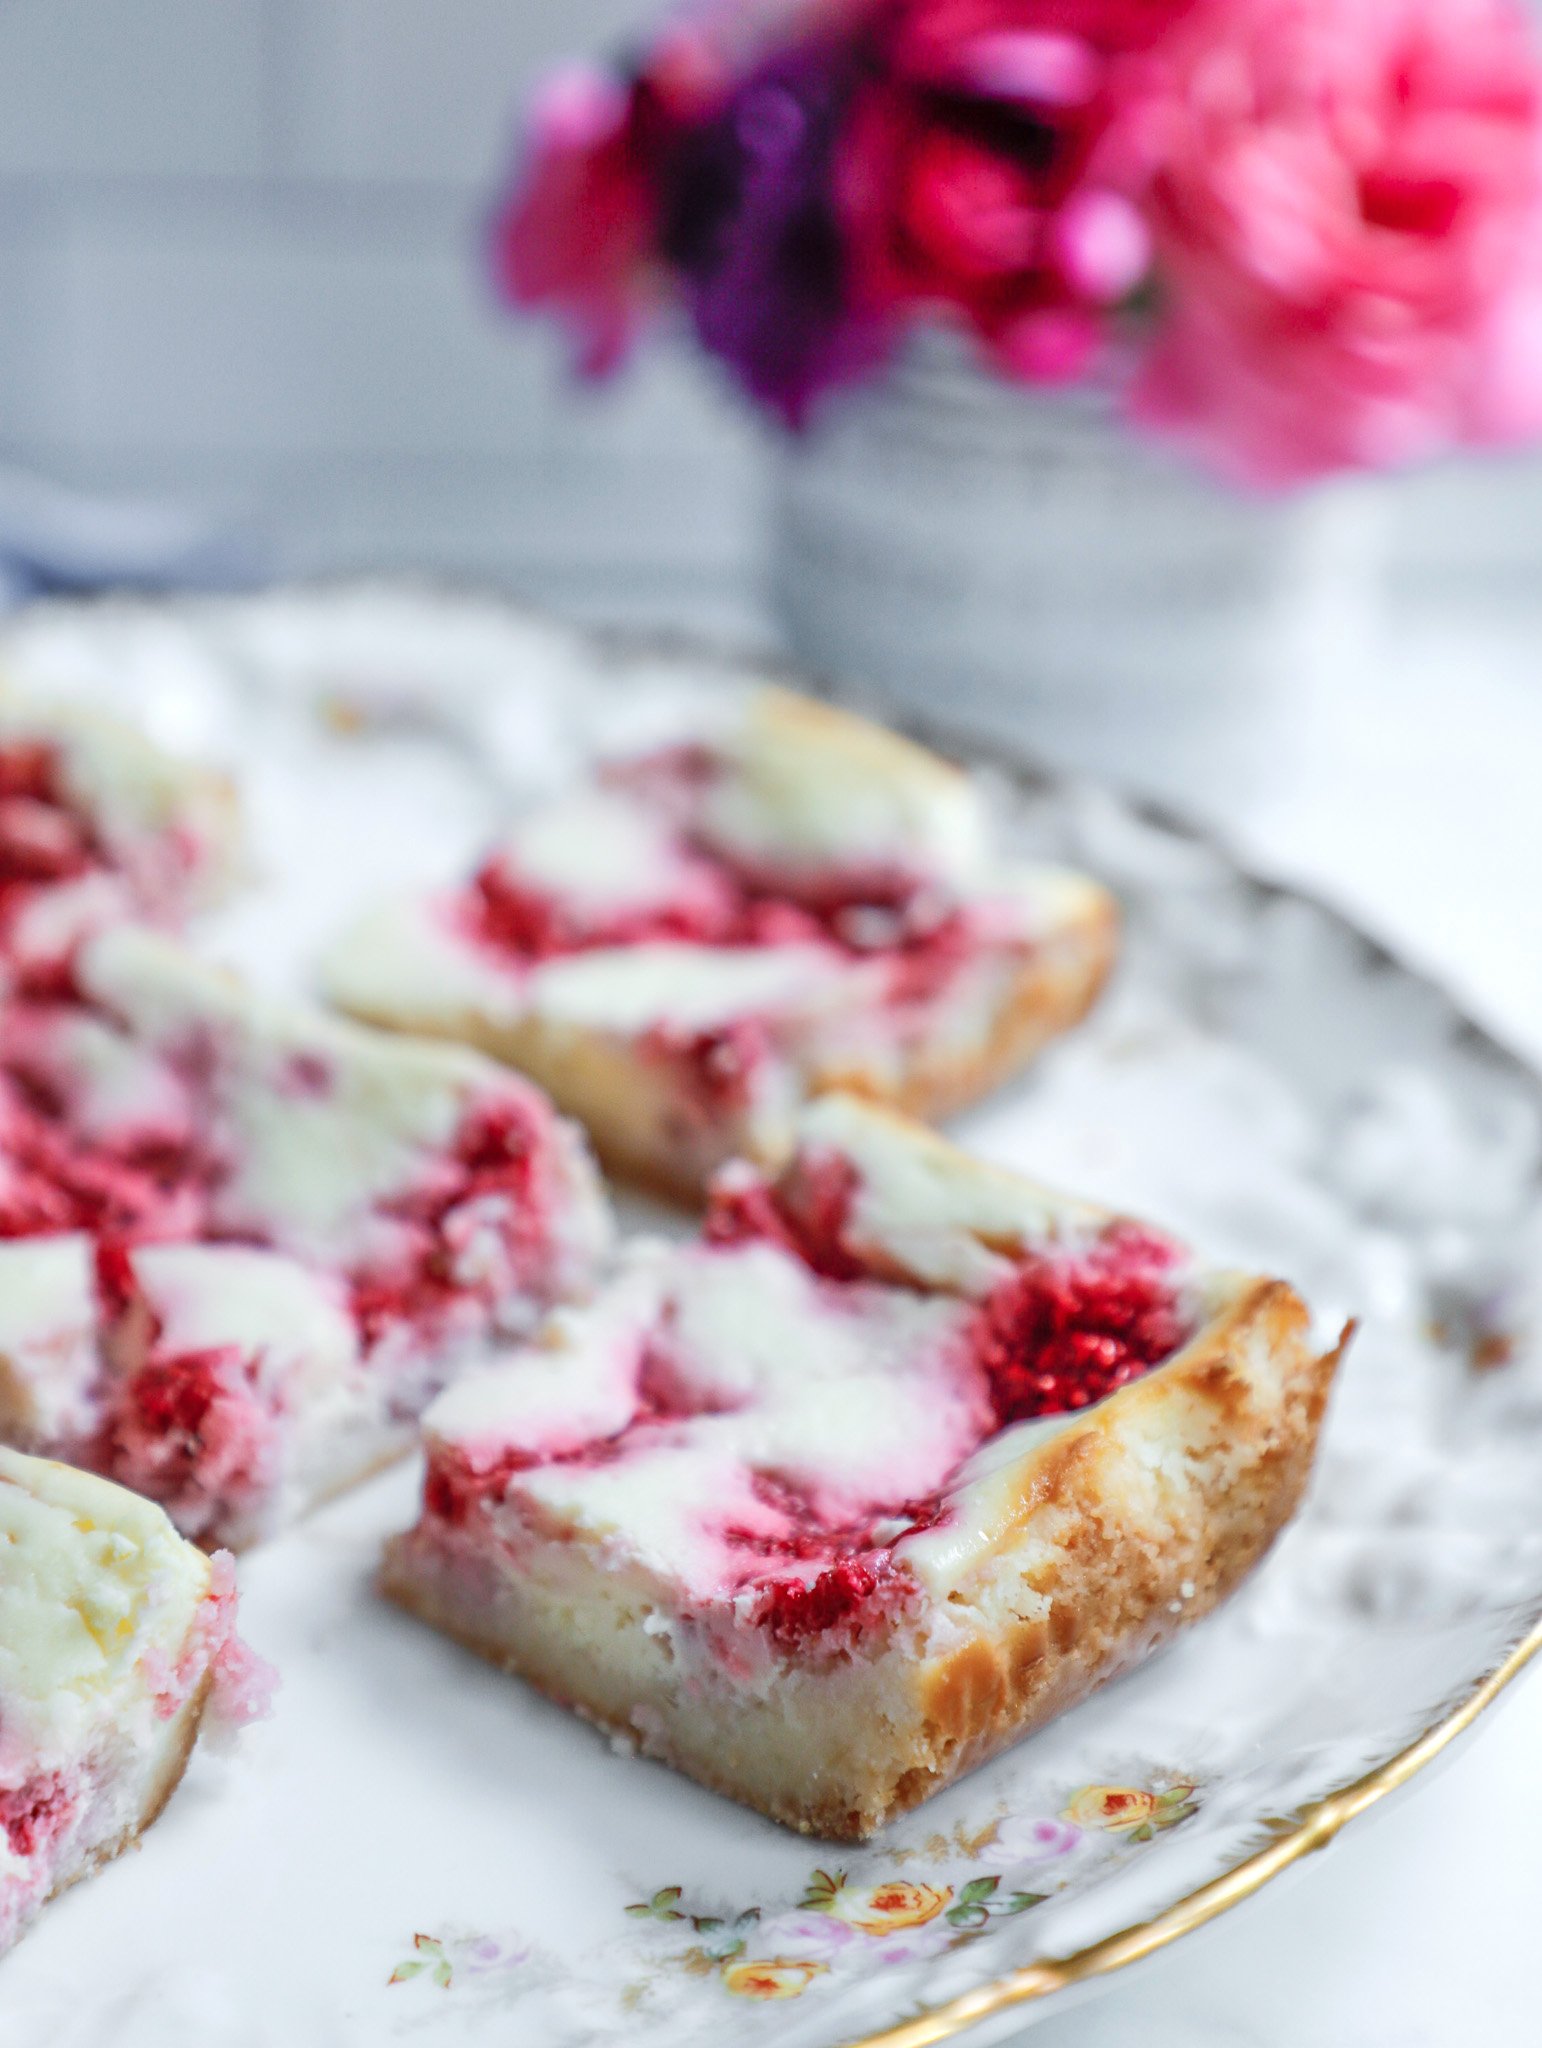 Raspberry cheesecake bars on a vintage platter with a white vase full of pink flowers in the background